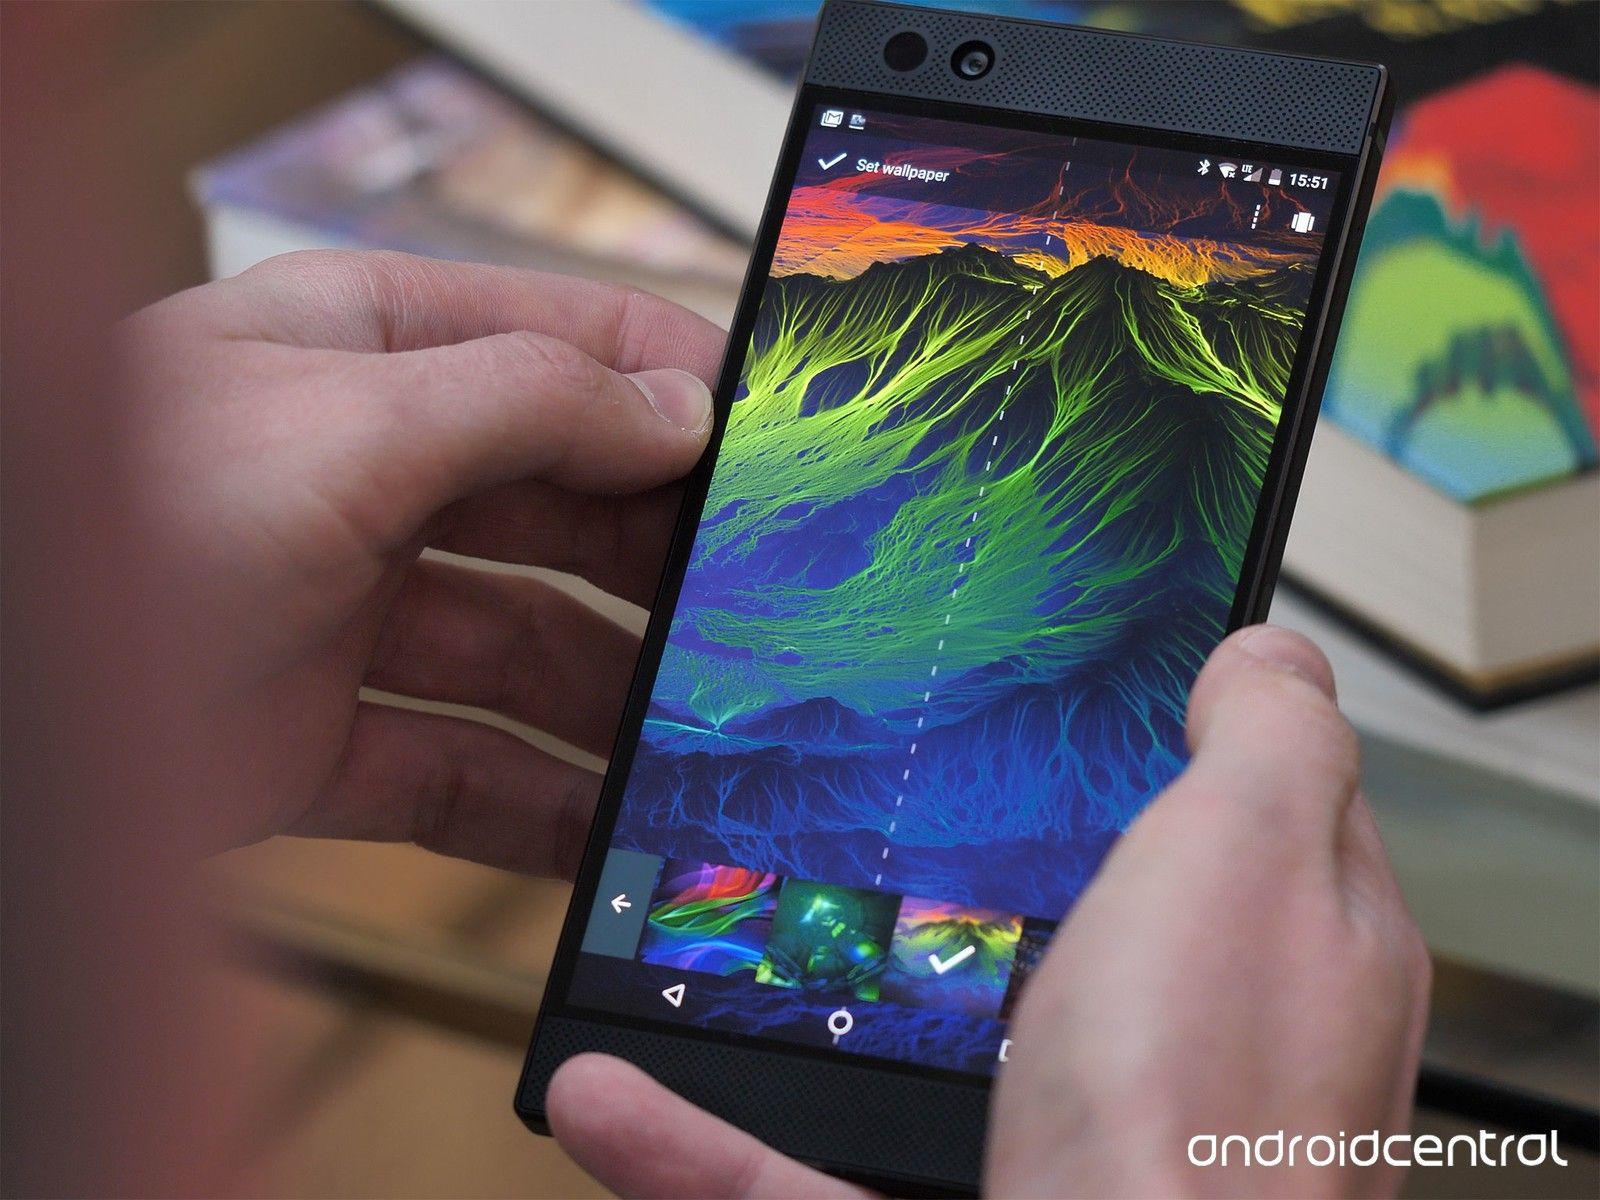 Razer Phone is first to support HDR and Dolby Digital 5.1 on Netflix